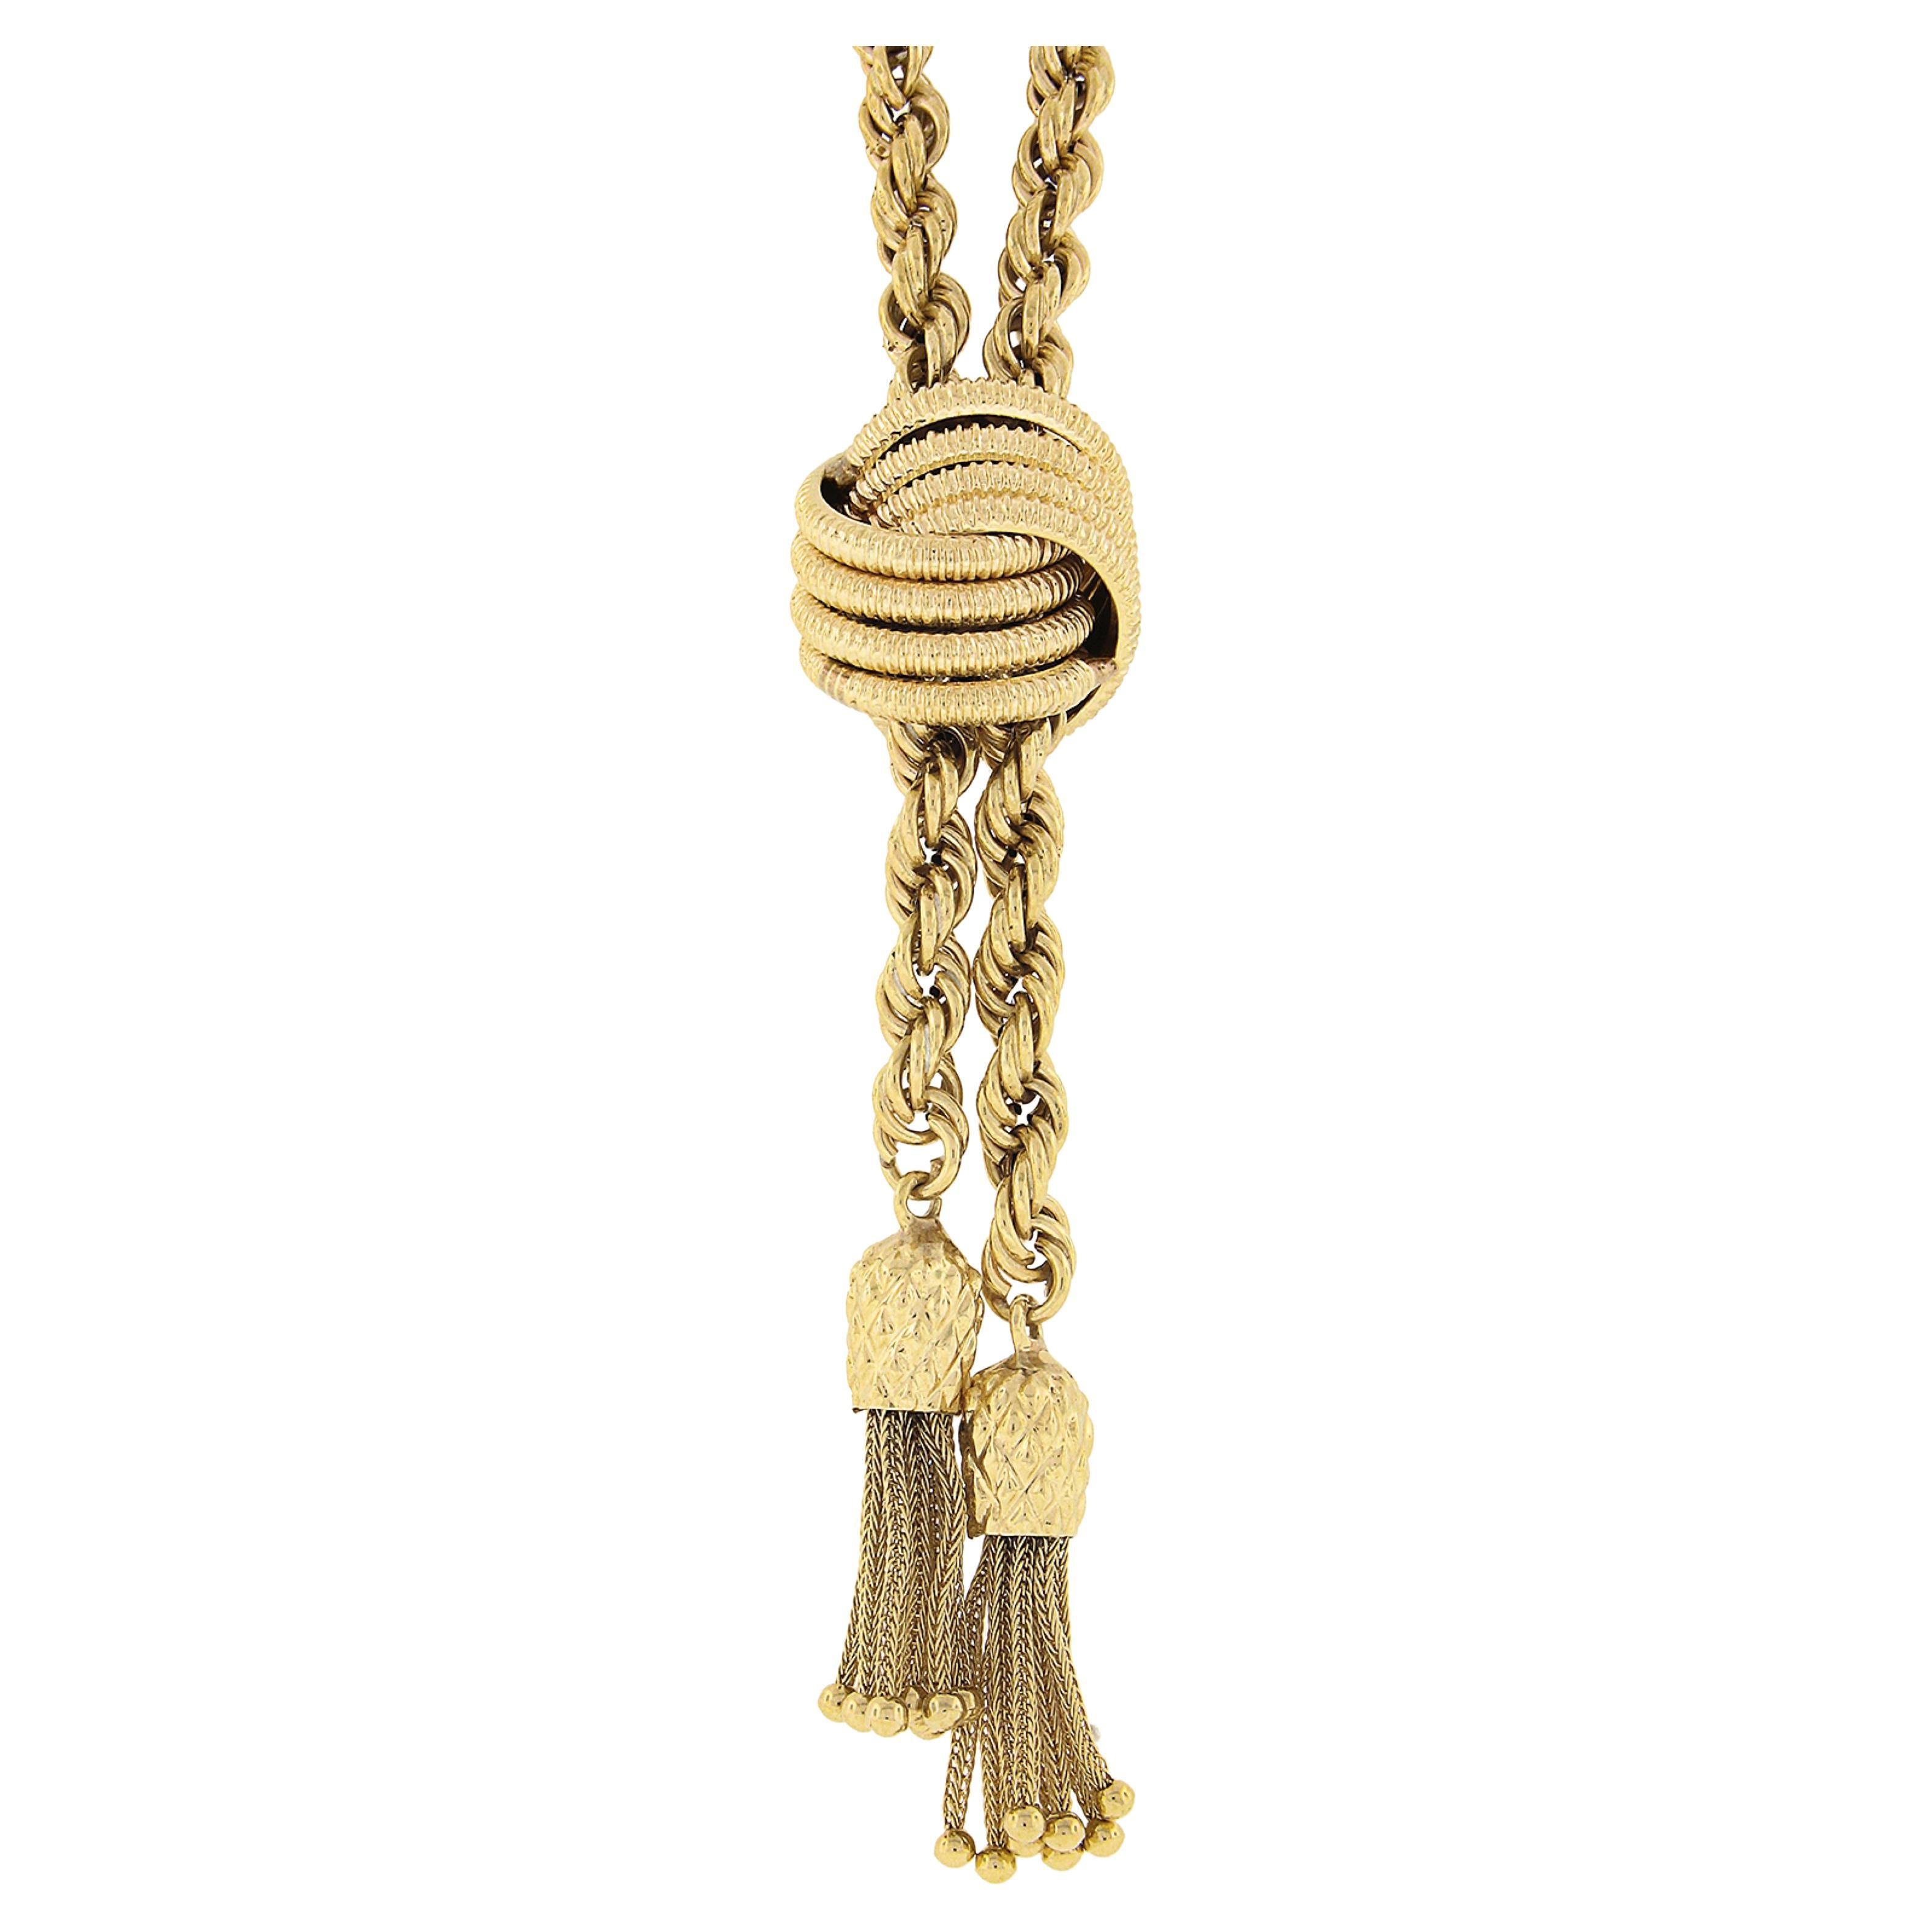 You are looking at a gorgeous necklace with a sliding pendant that was crafted from solid 14k yellow gold. The necklace features a long and fancy 5.7mm rope link chain with tassels that gently dangle from the bottom, as well as a pendant that